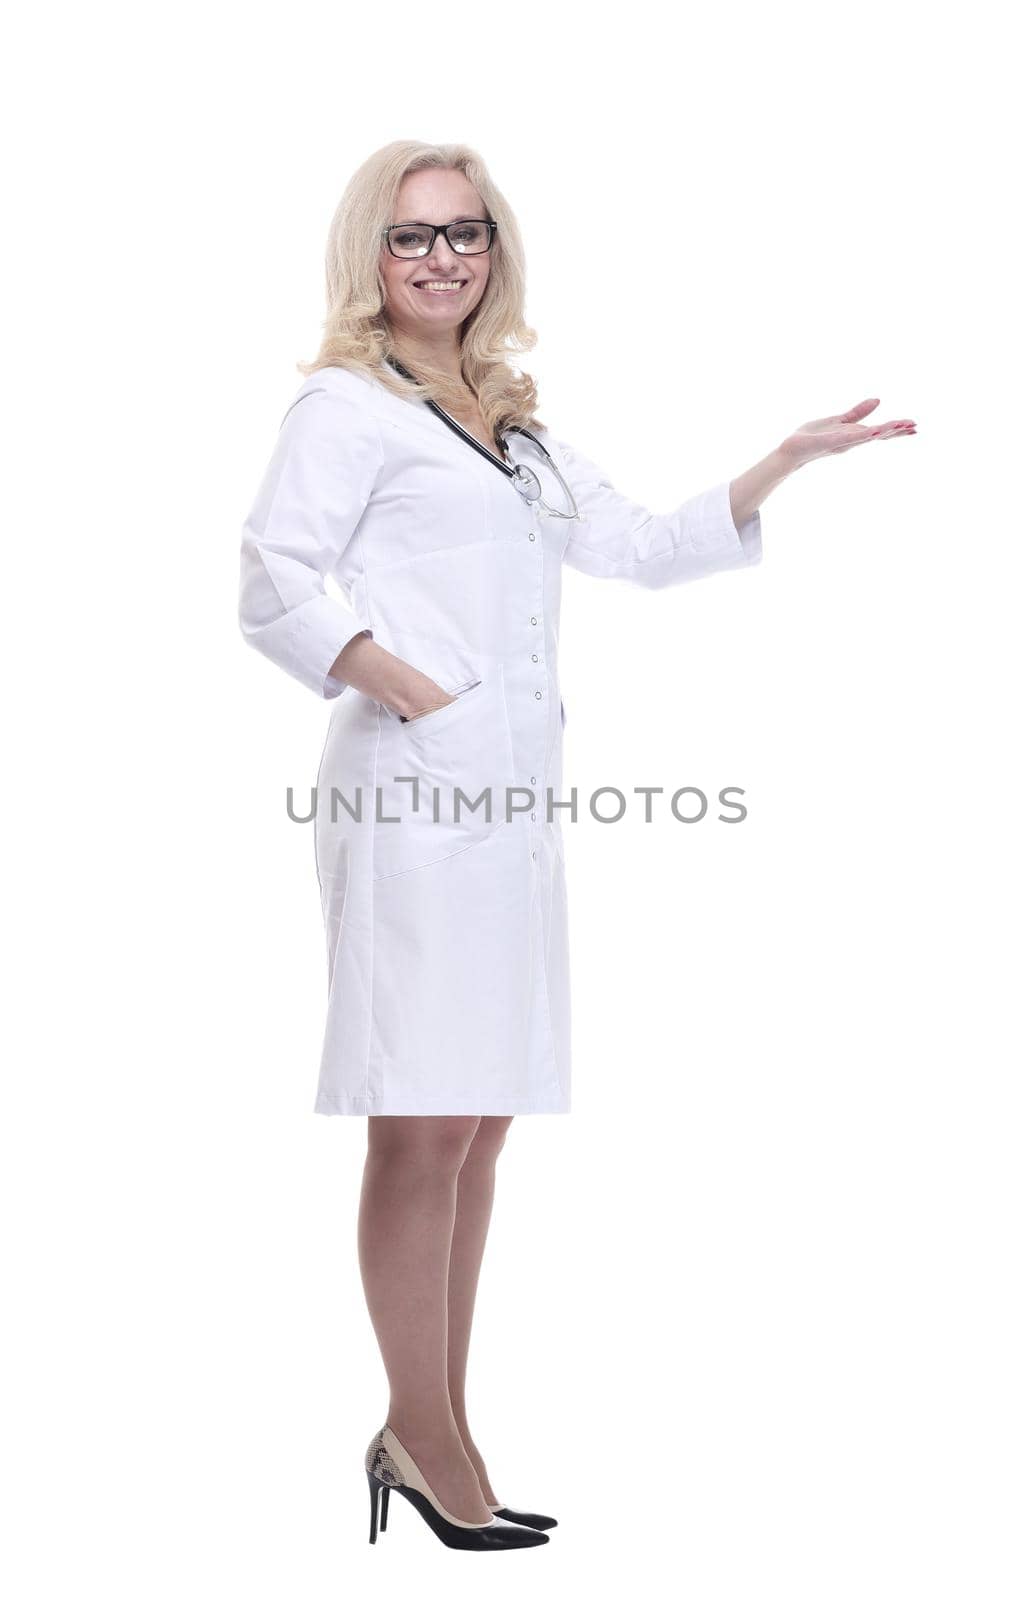 in full growth.a smiling female doctor pointing at a white blank screen . isolated on a white